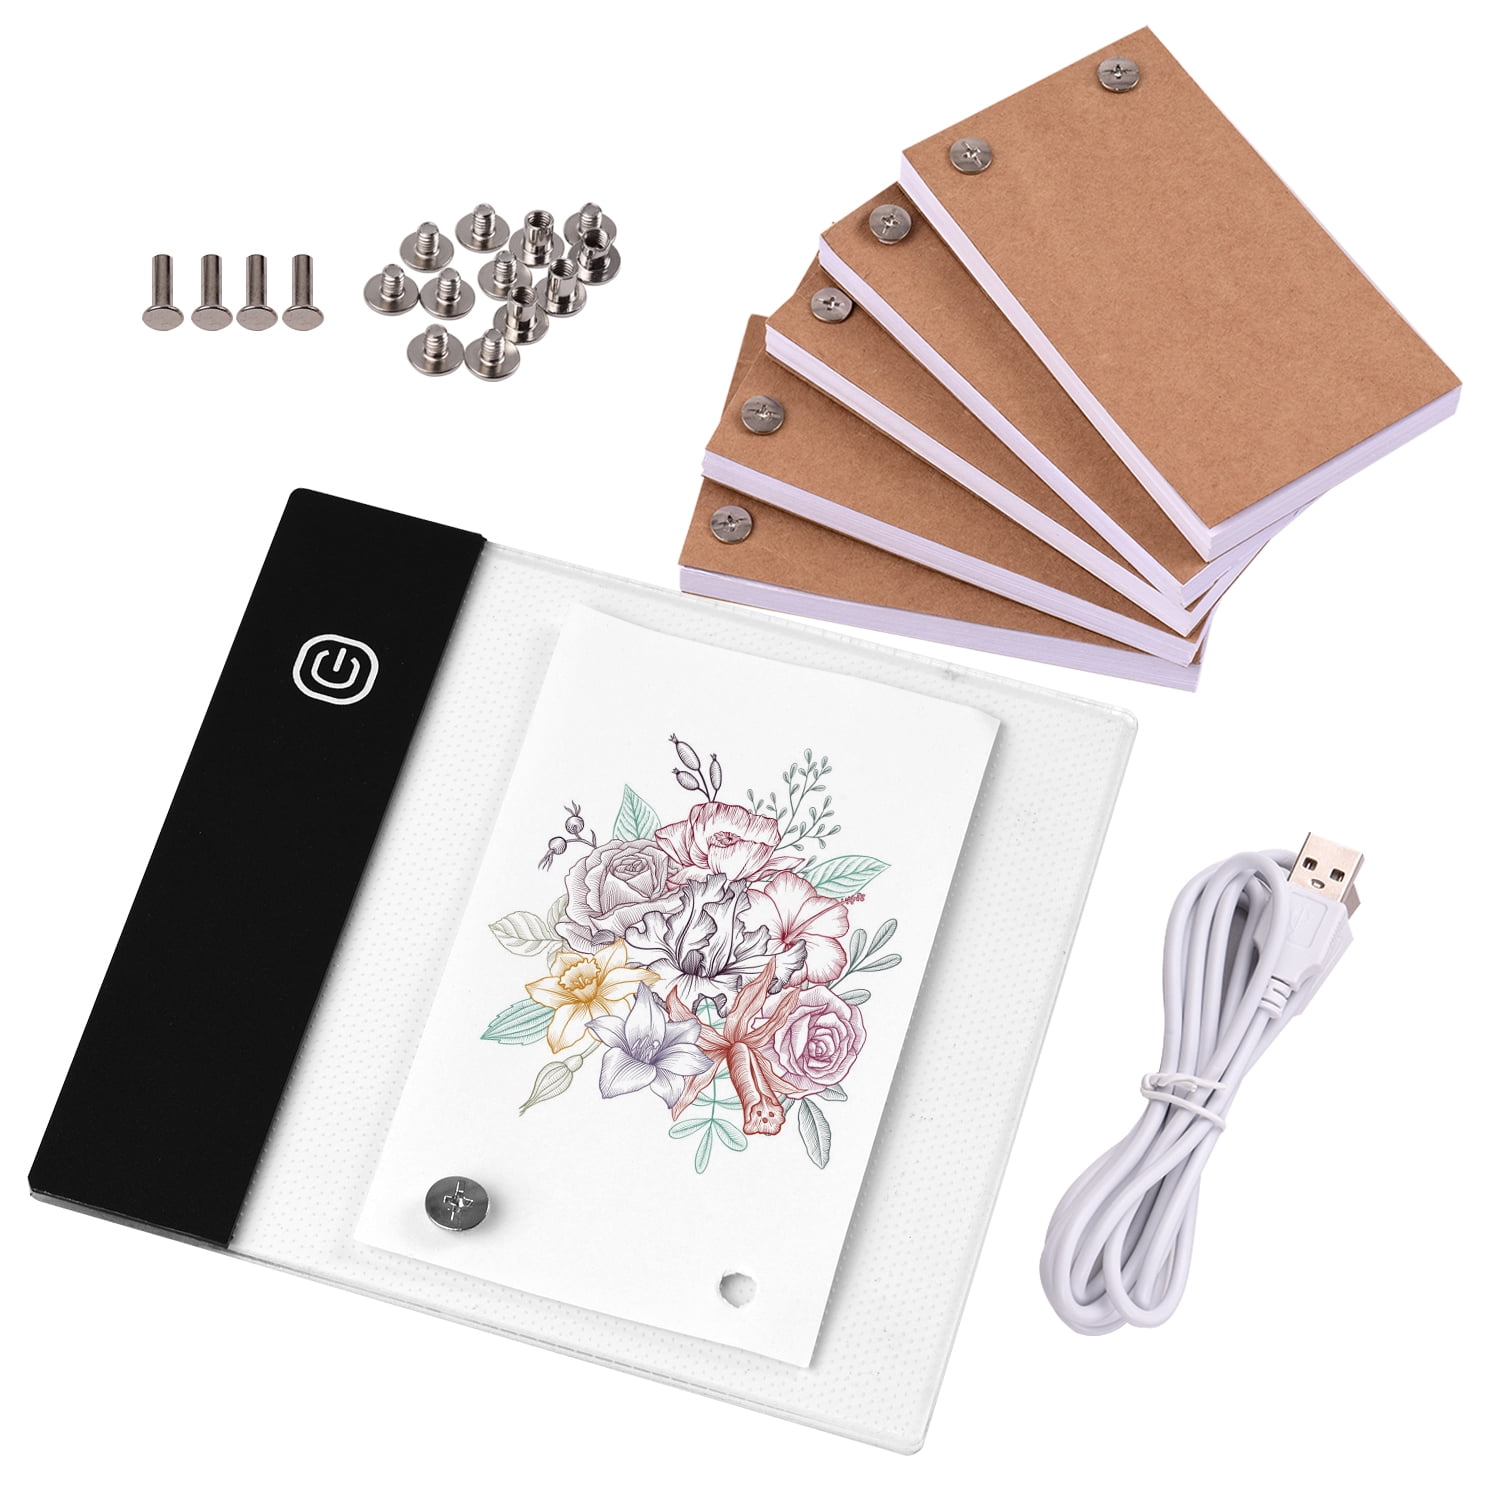 Zwbfu Flip Book Kit with Mini LED Light Pad Hole Design 3 Level Brightness Control Light Box 300 Sheets Animation Paper Flipbook Binding Screws for Children Students Adults Drawing Tracing Sketching f 